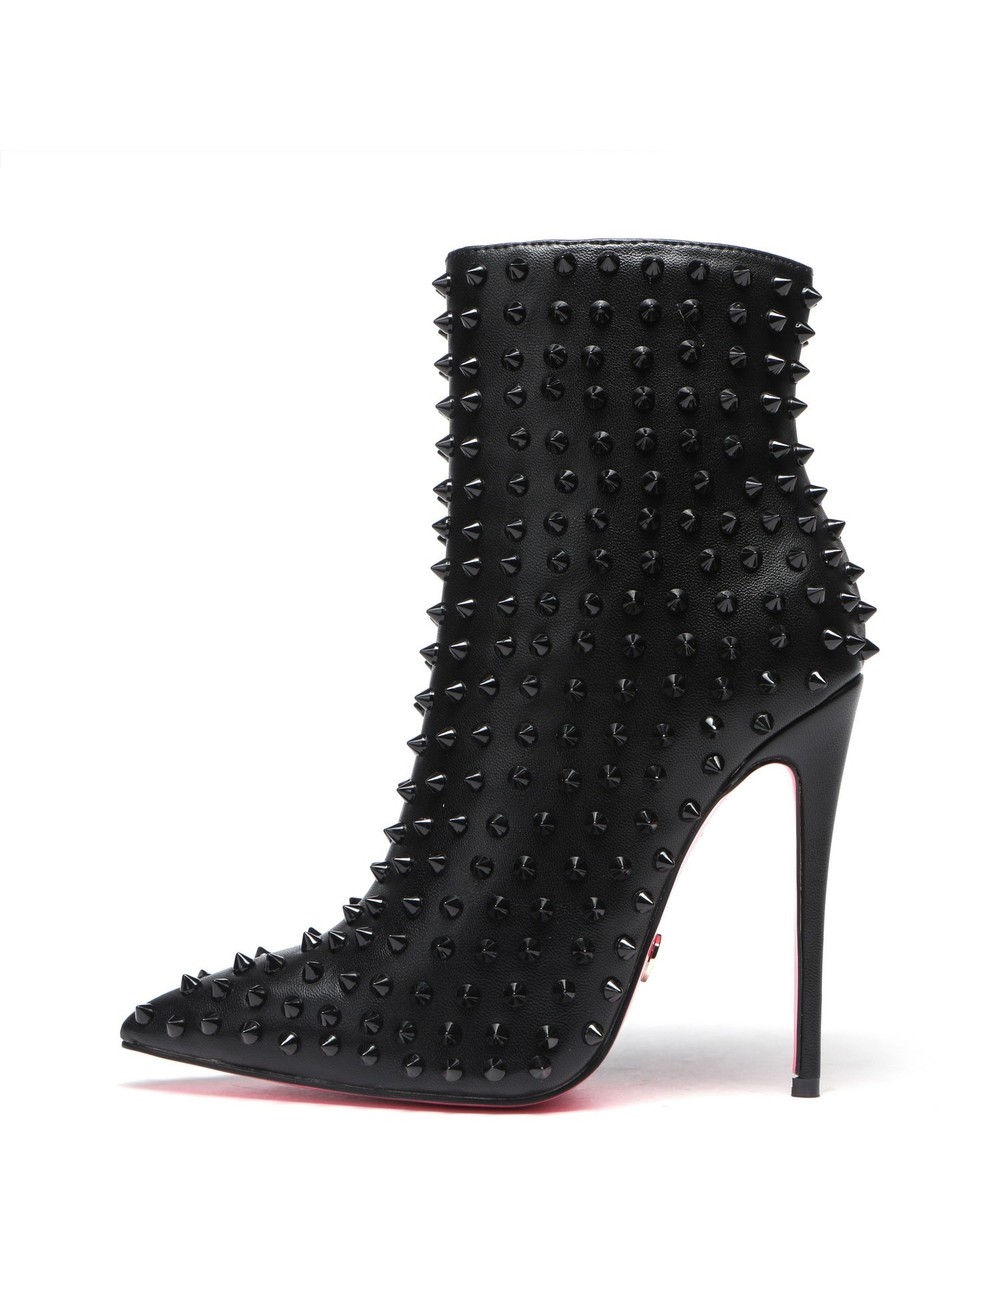 Giaro TYCLONE BLACK/BLACK ANKLE BOOTS - Giaro High Heels | Official ...